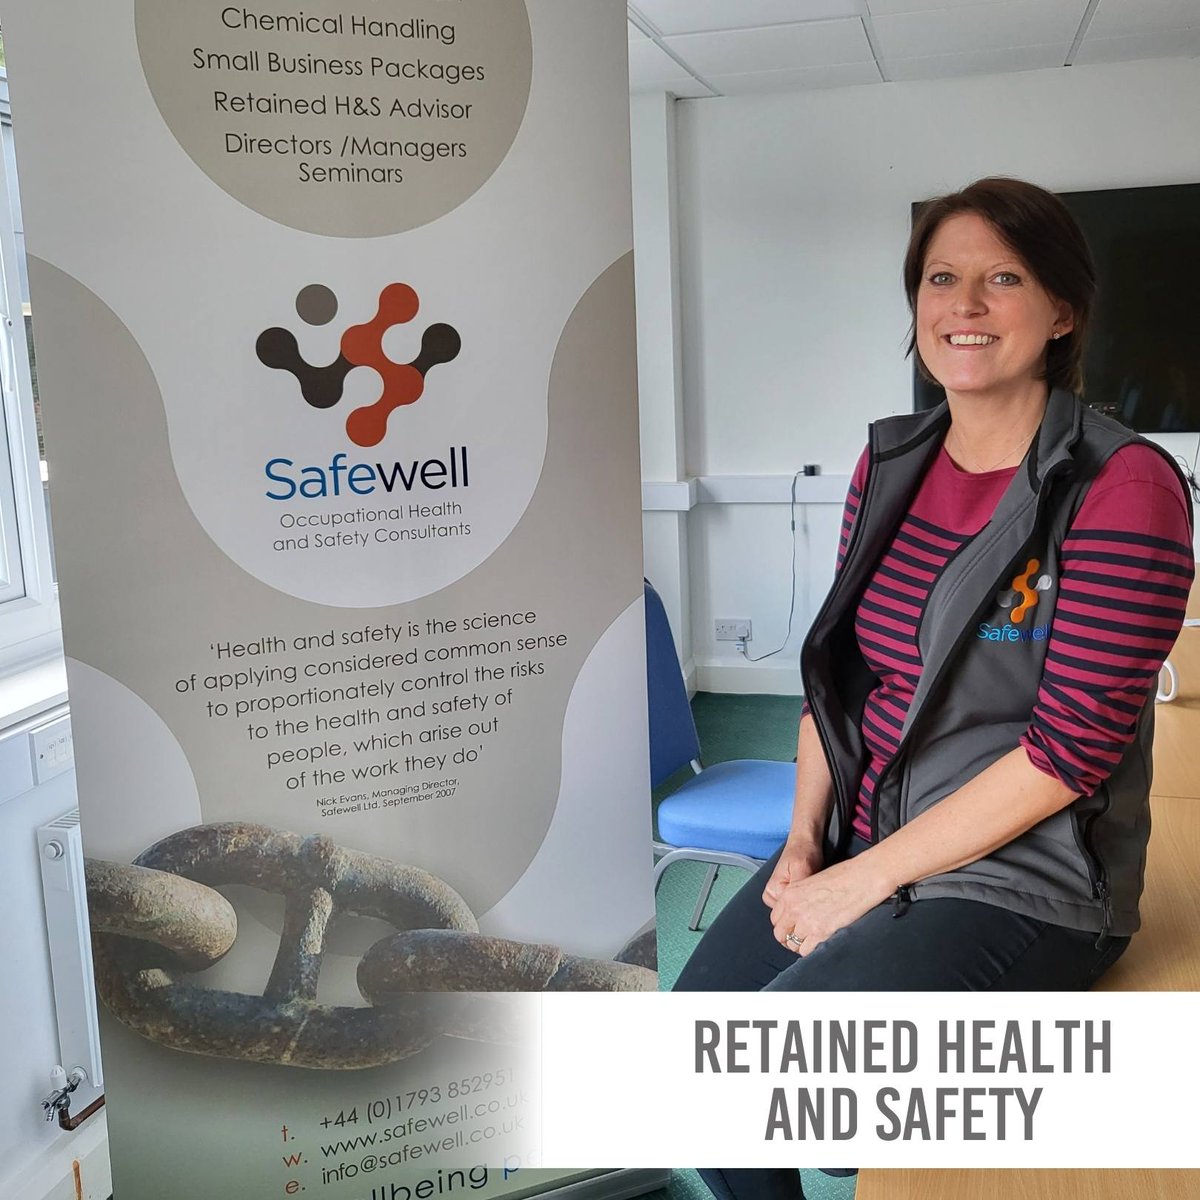 Do you need peace of mind that you are compliant with health and safety law? We can provide advice on an ongoing basis. Access a wealth of knowledge and expertise without having another person on the payroll. Read more here >>> bit.ly/3Ikc0Wb